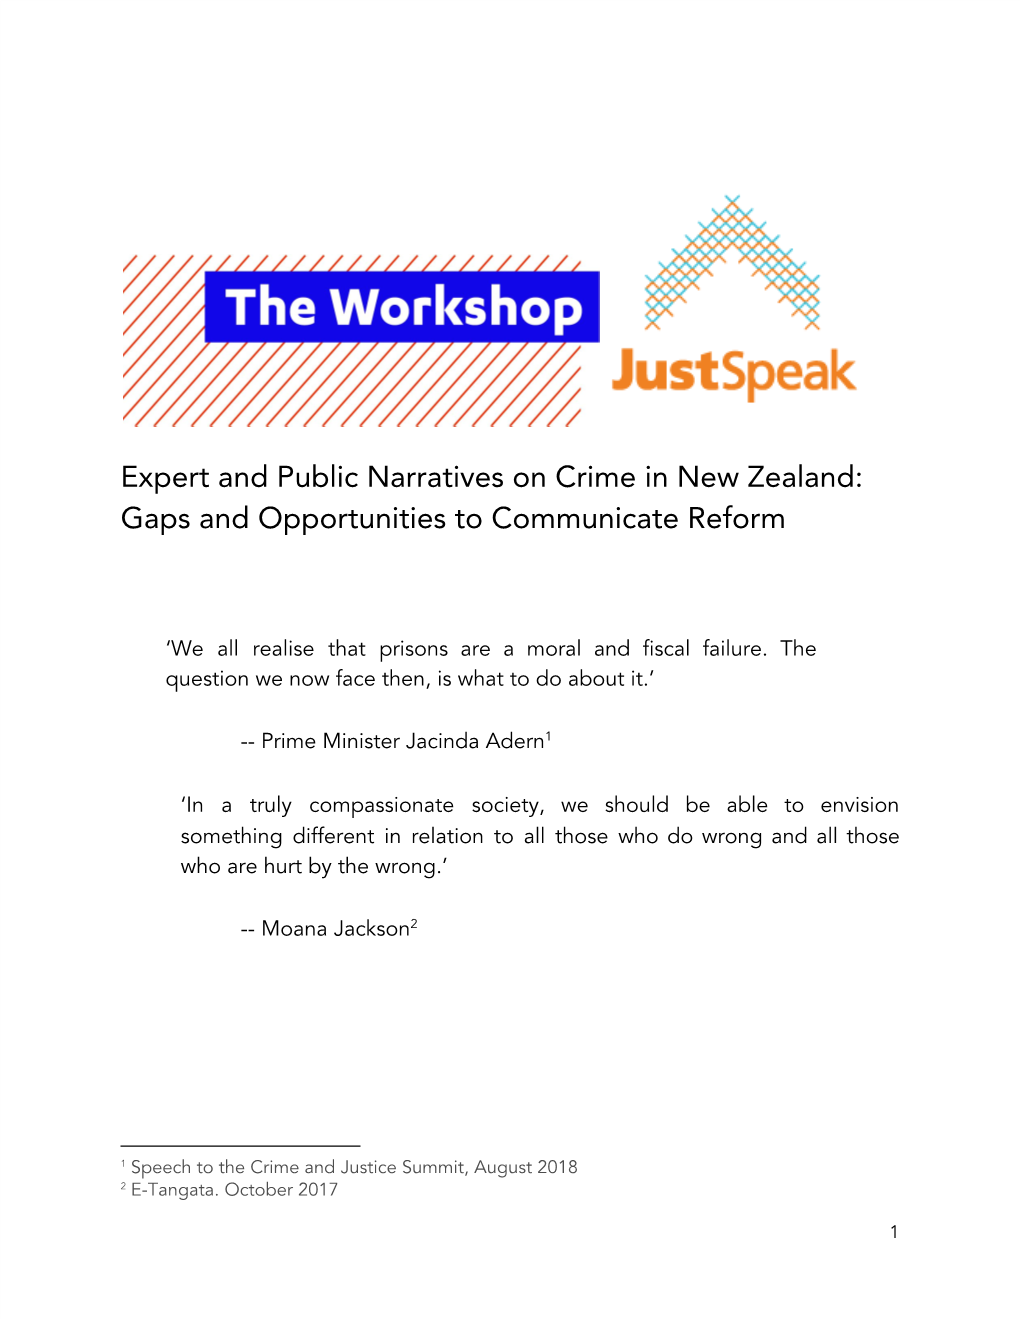 Expert and Public Narratives on Crime in New Zealand: Gaps and Opportunities to Communicate Reform